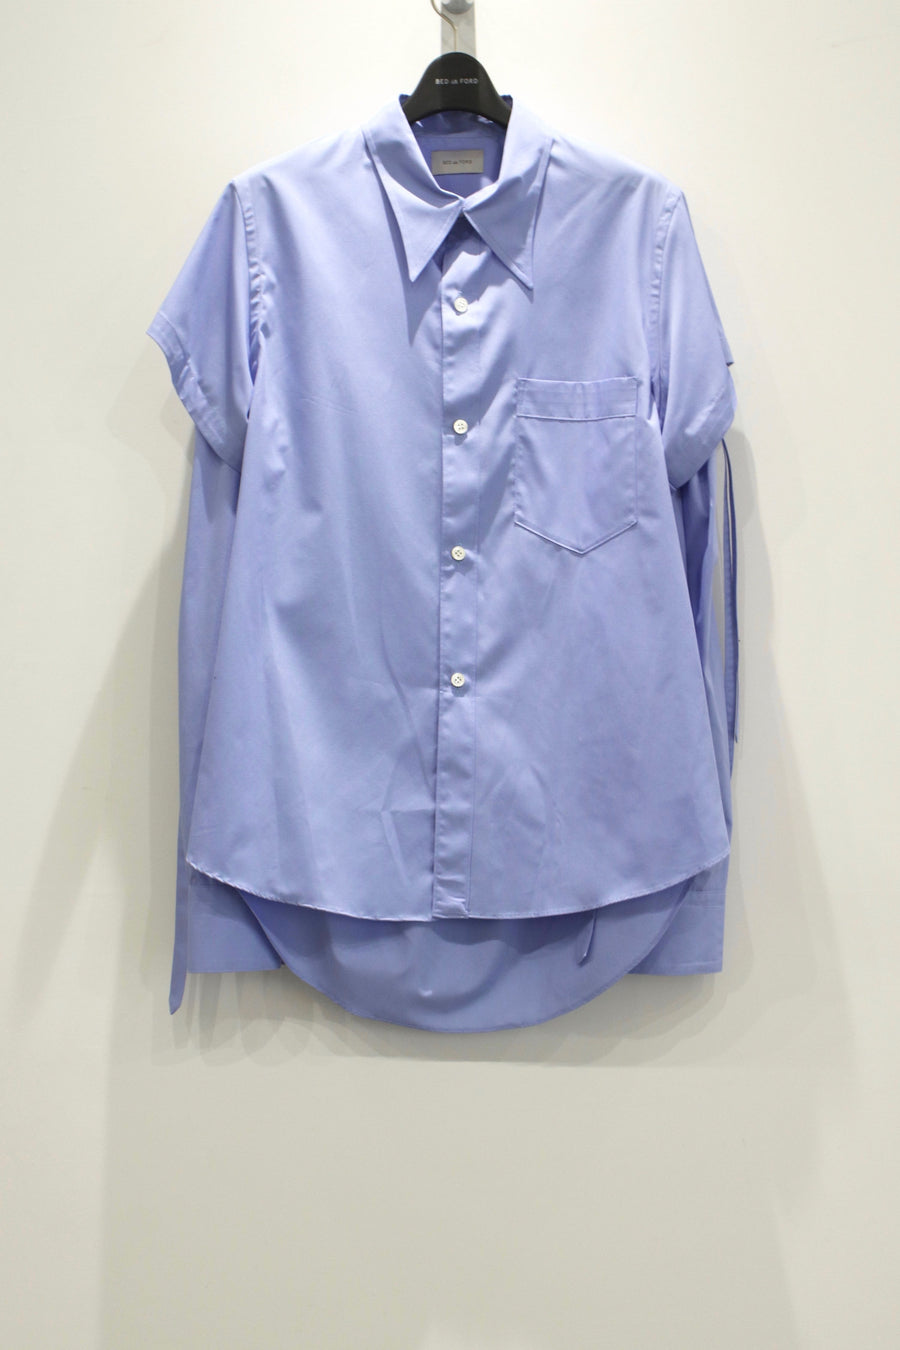 BED j.w. FORD  Double-Sleeve Shirts(SAX)